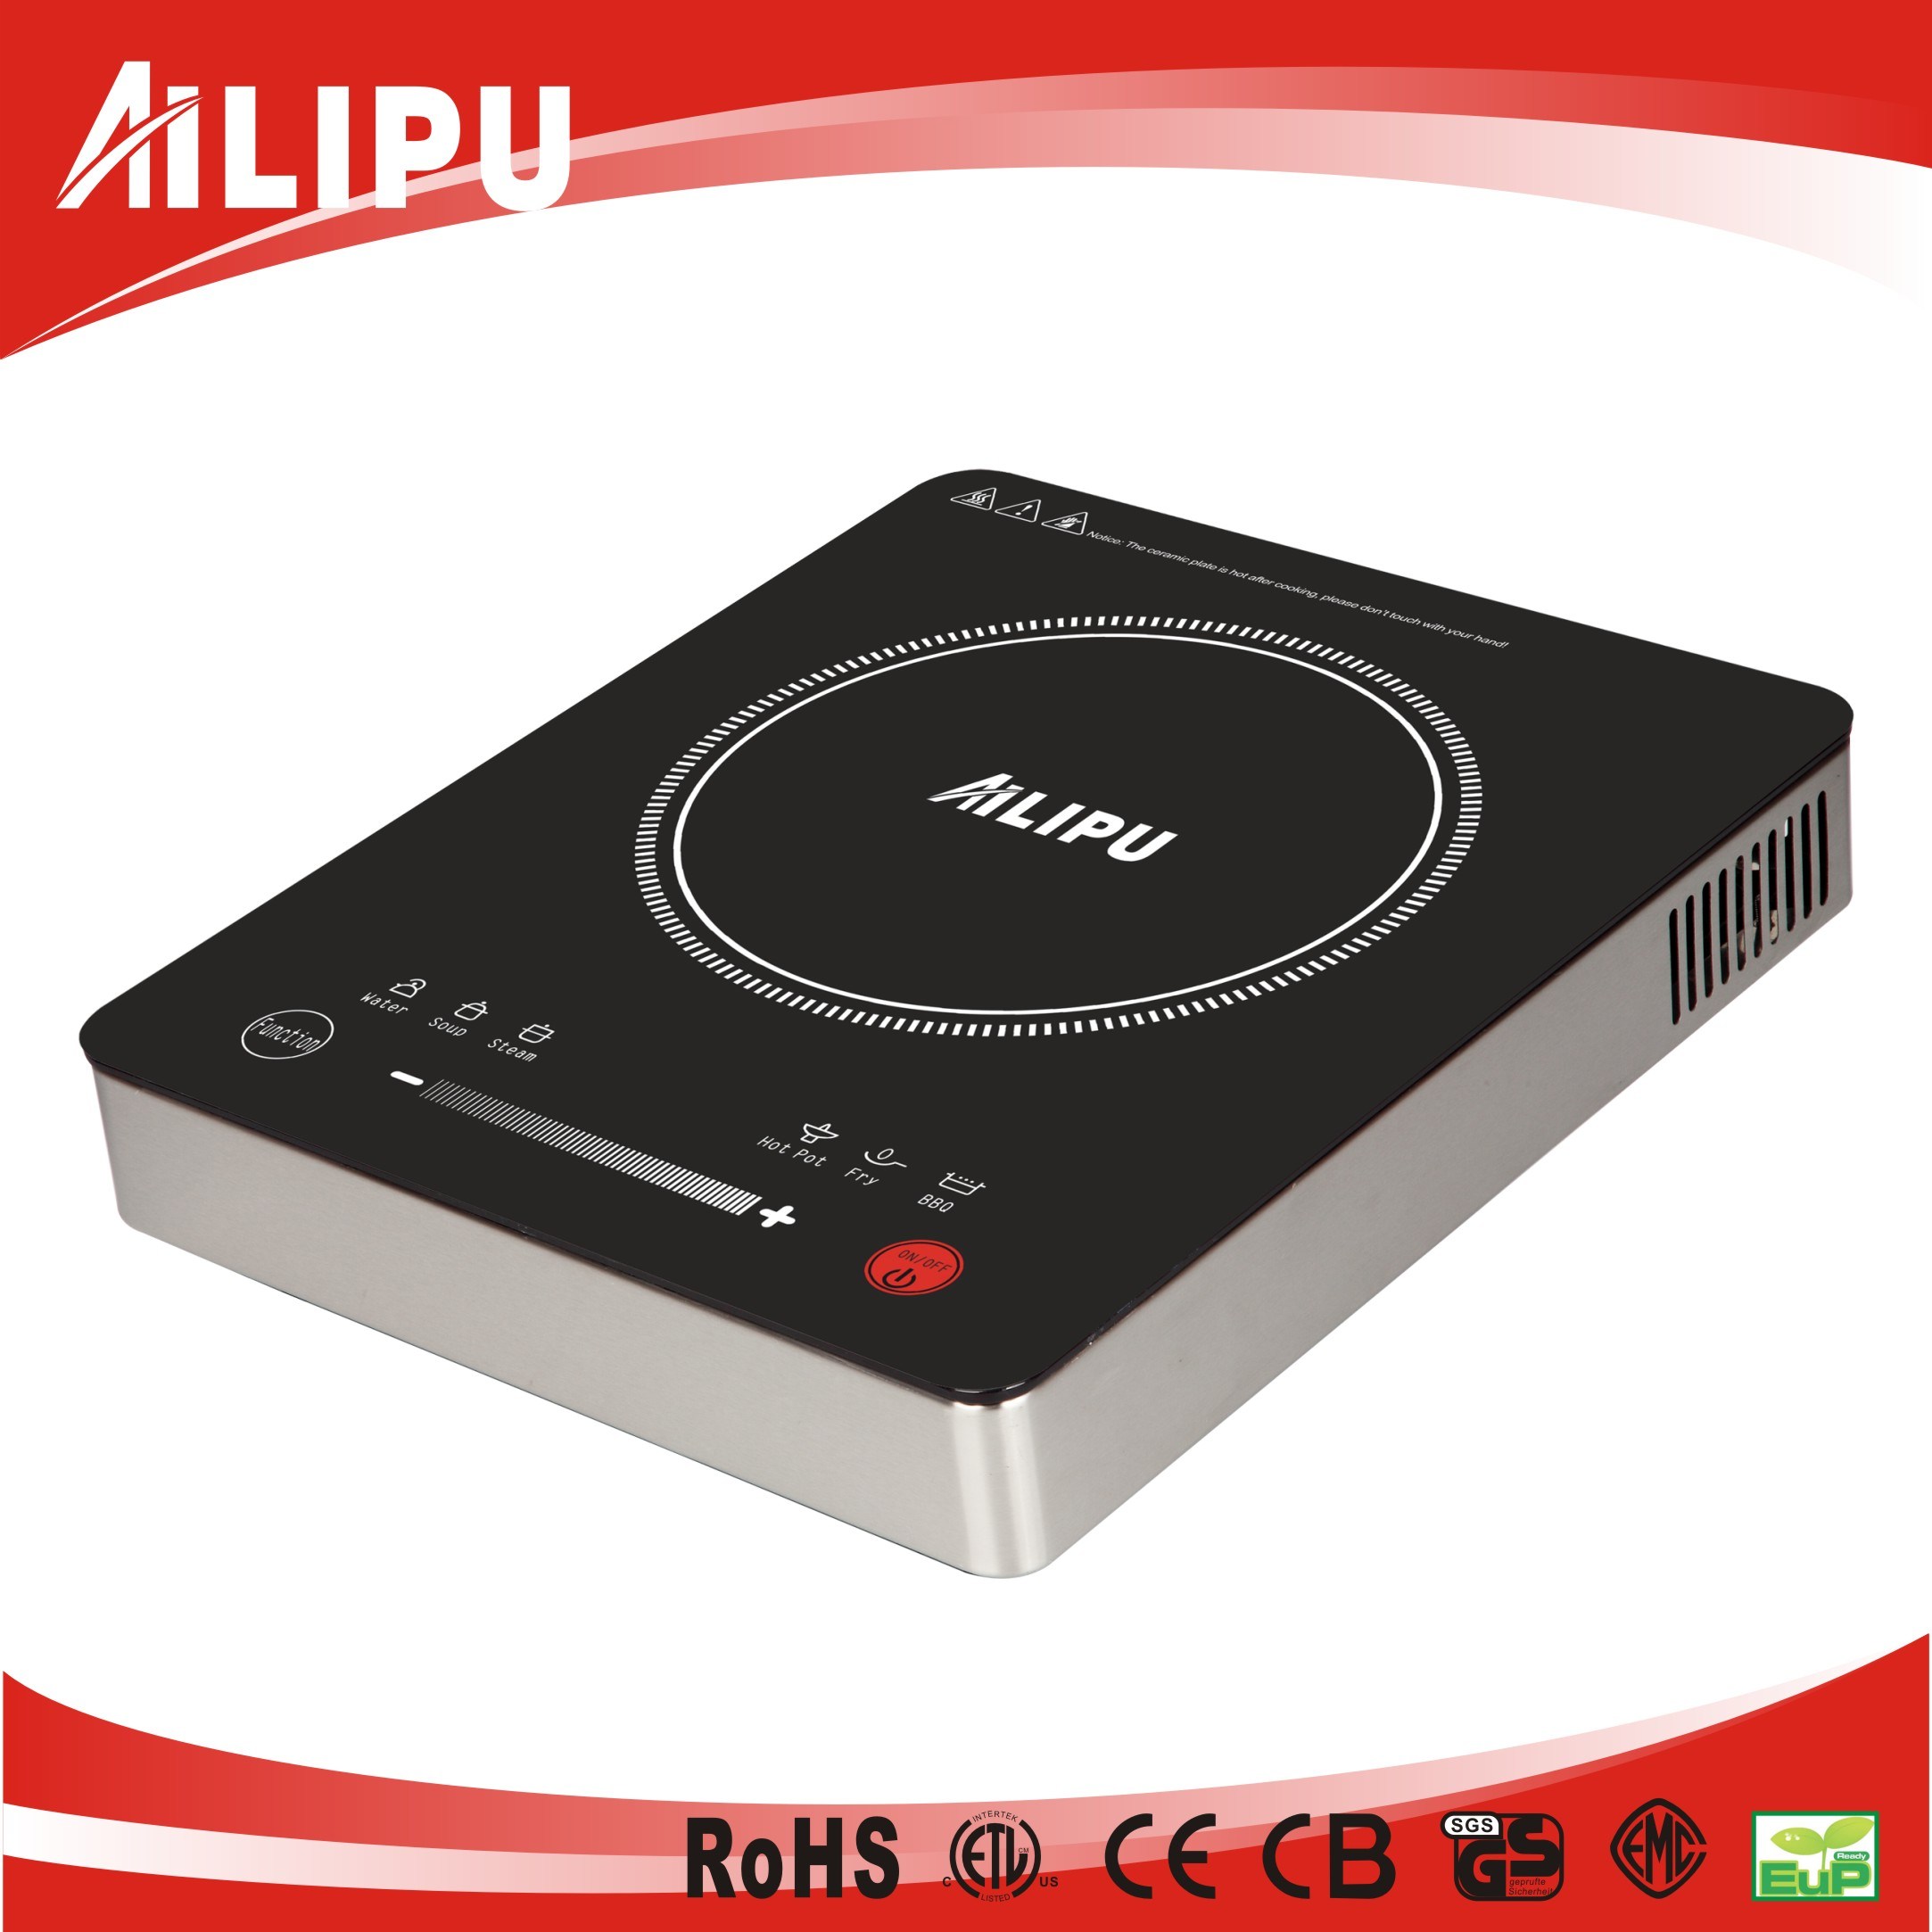 Ailipu High Power 2500W Commercial Induction Cooktop for Hotel Use (Model SM-A81)